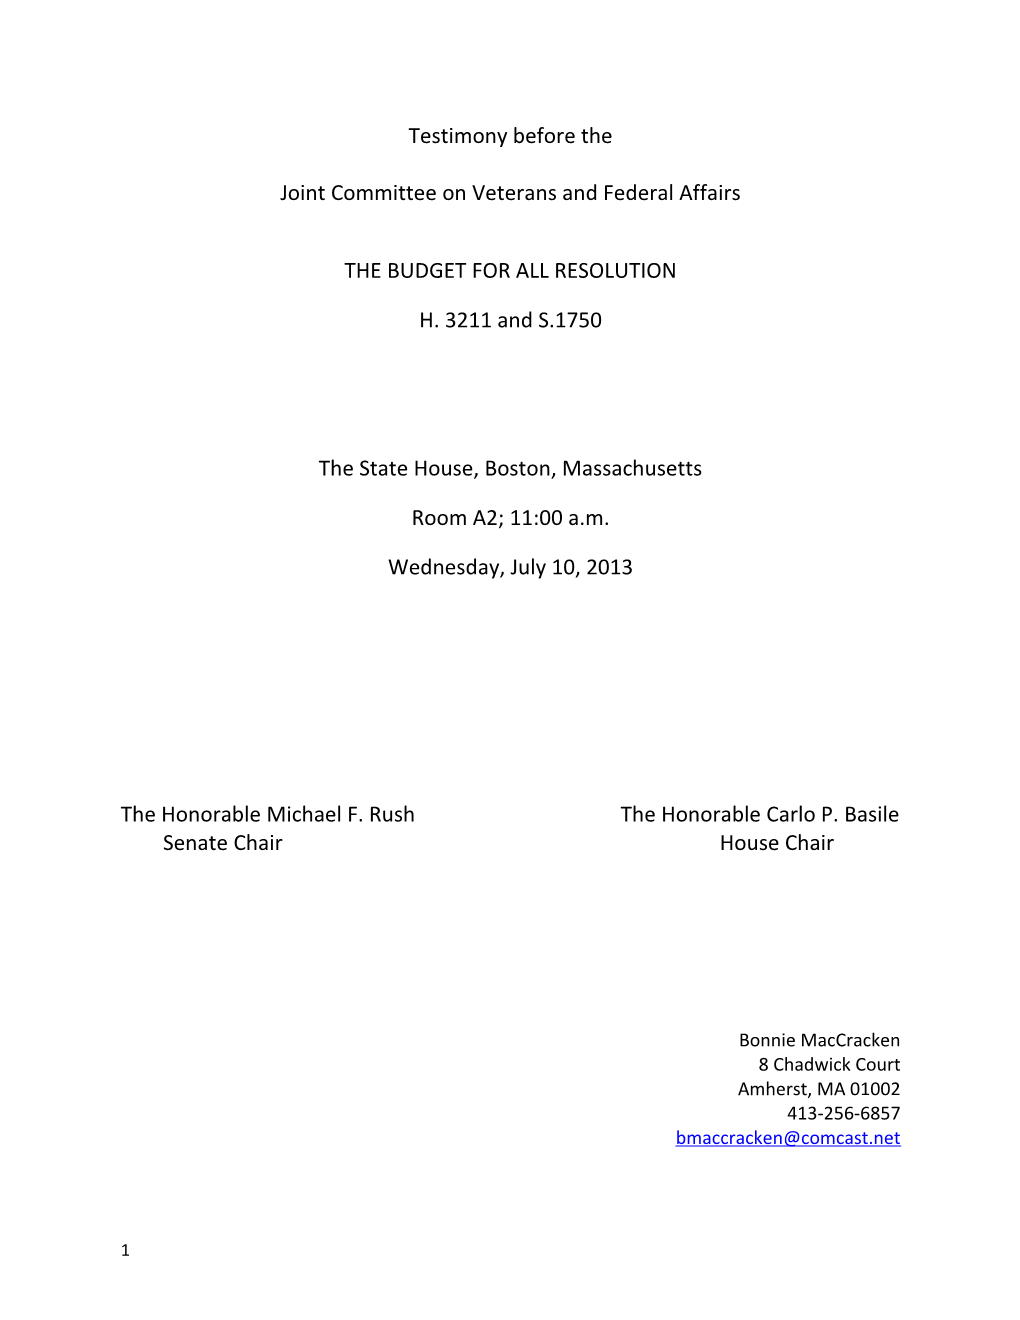 Joint Committee on Veterans and Federal Affairs